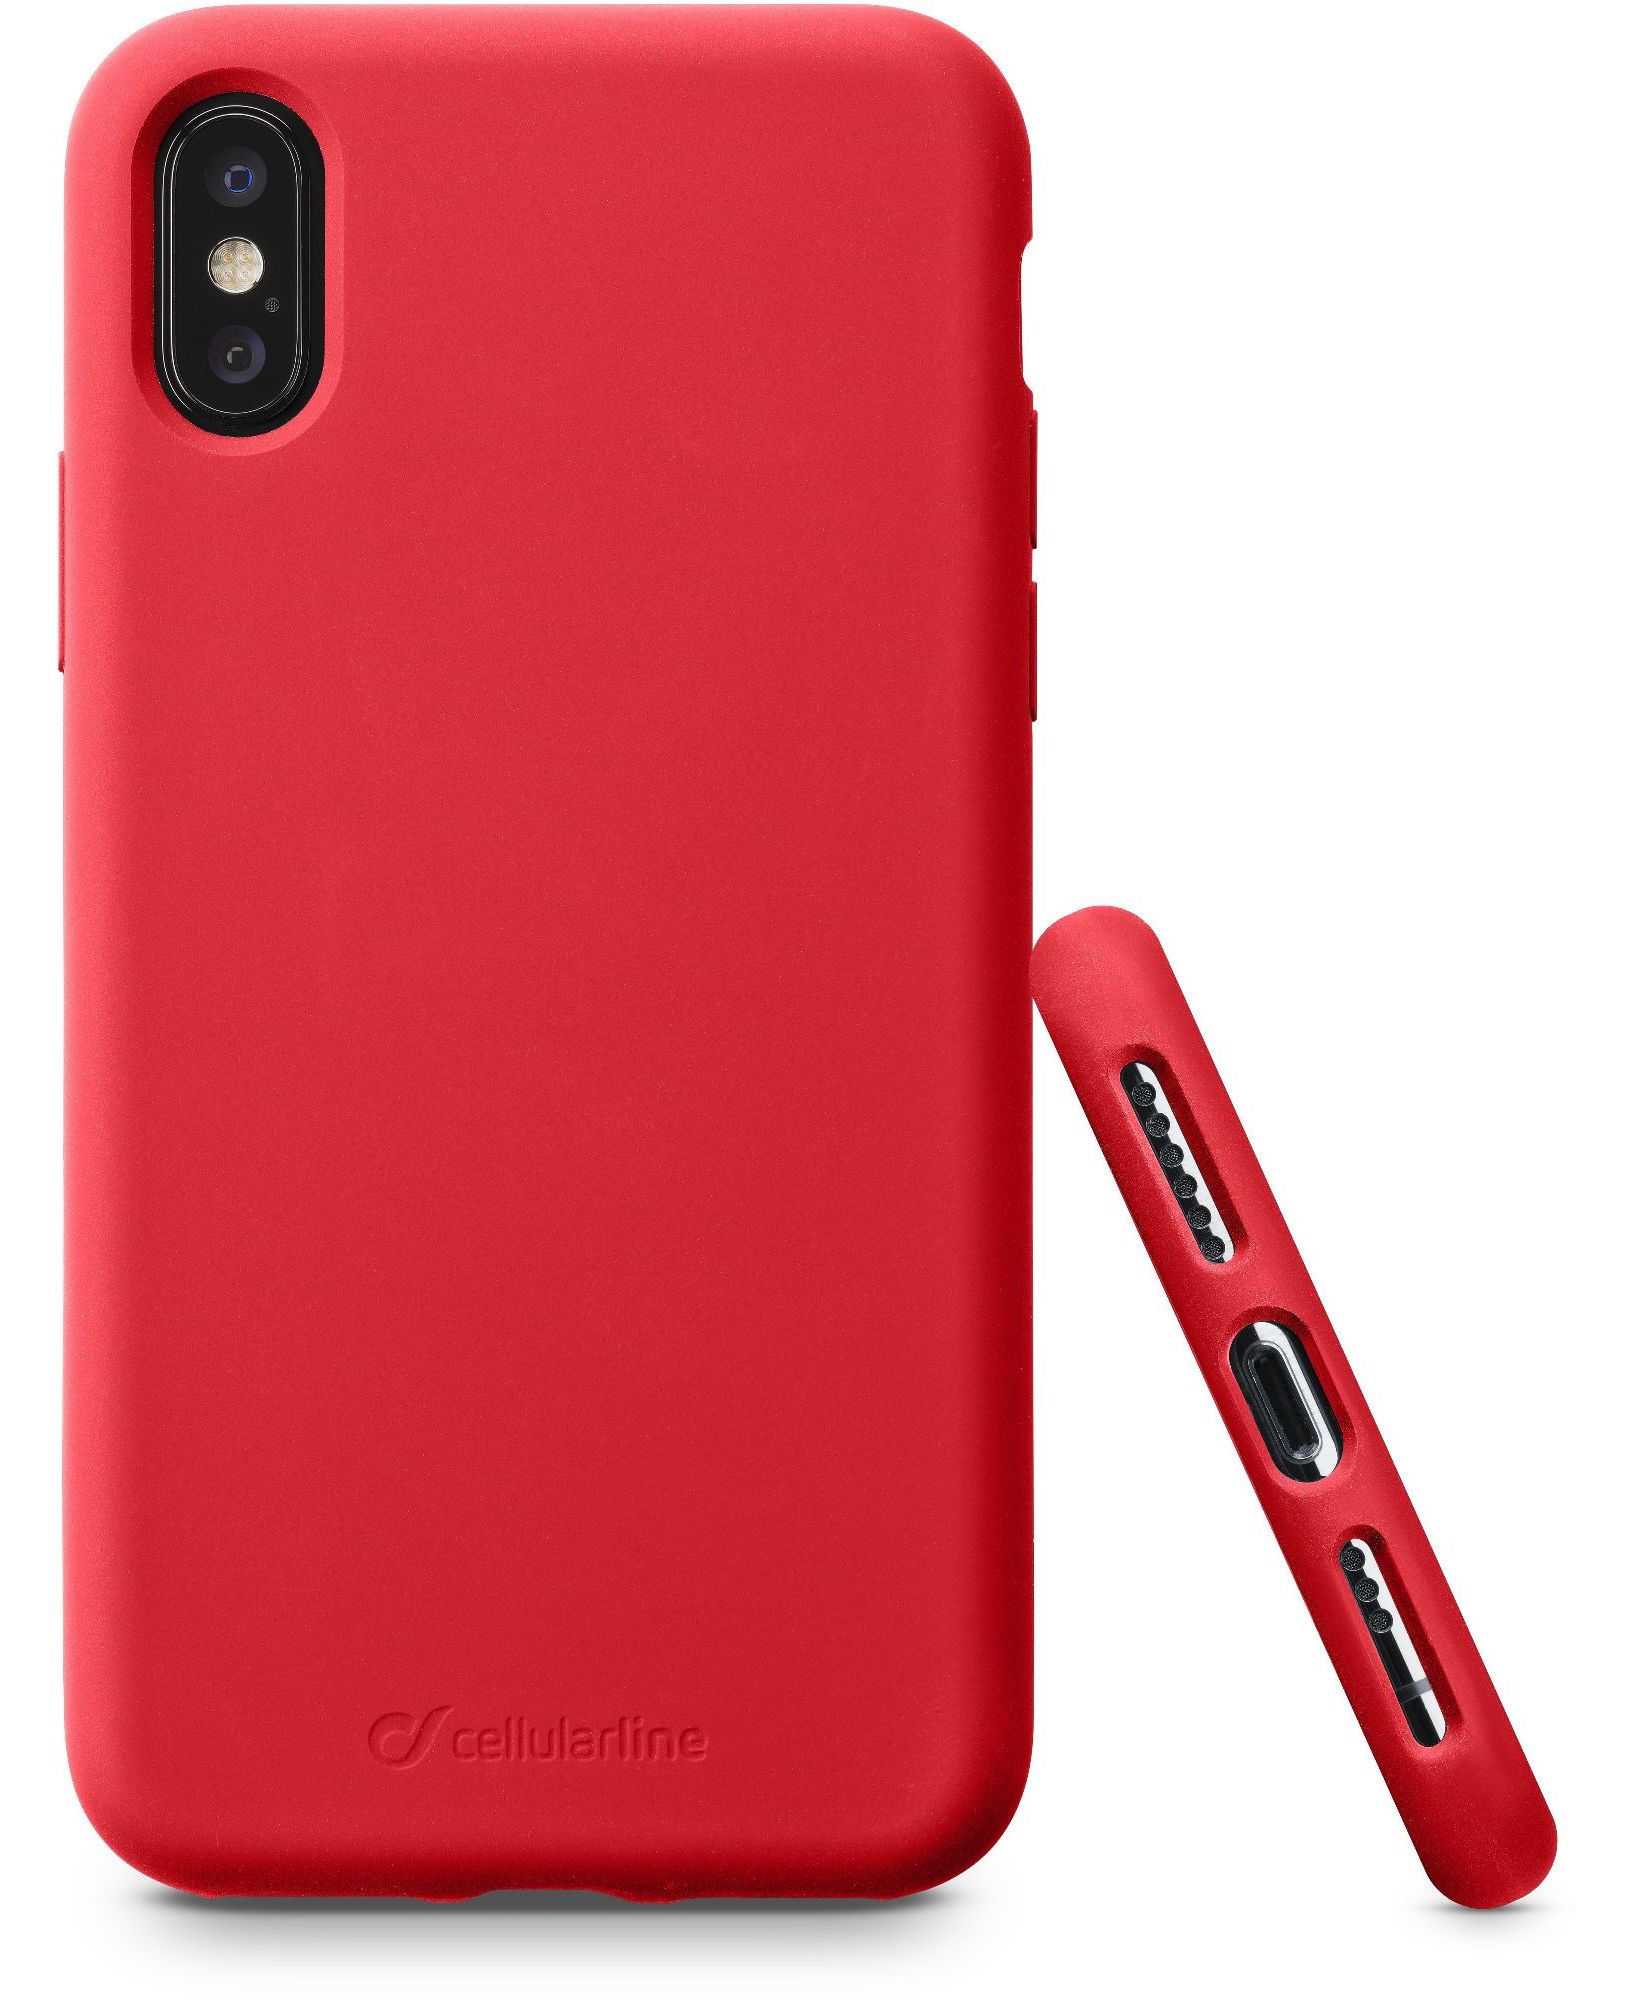 Cellularline Sensation - iPhone XS/X Custodia in silicone soft touch Rosso